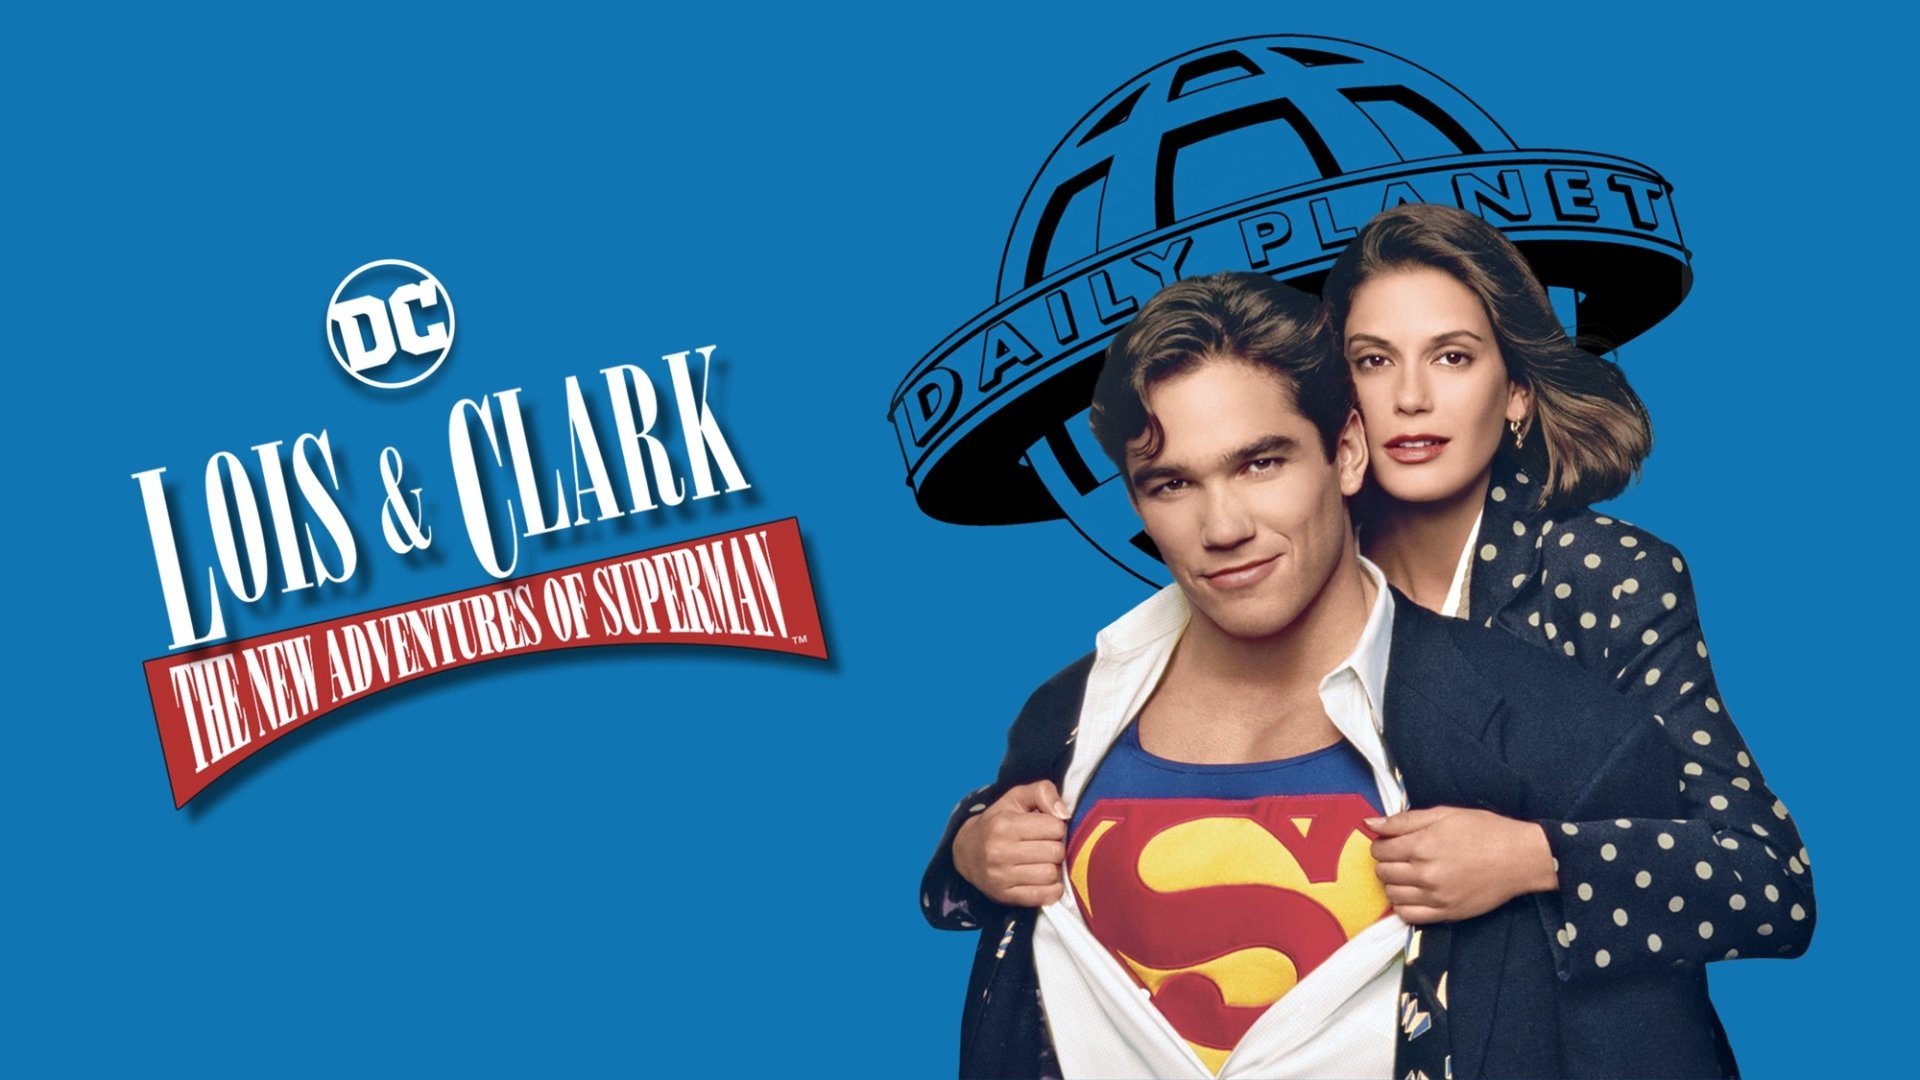 Lois clark the new adventures of superman hd papers und hintergrãnde